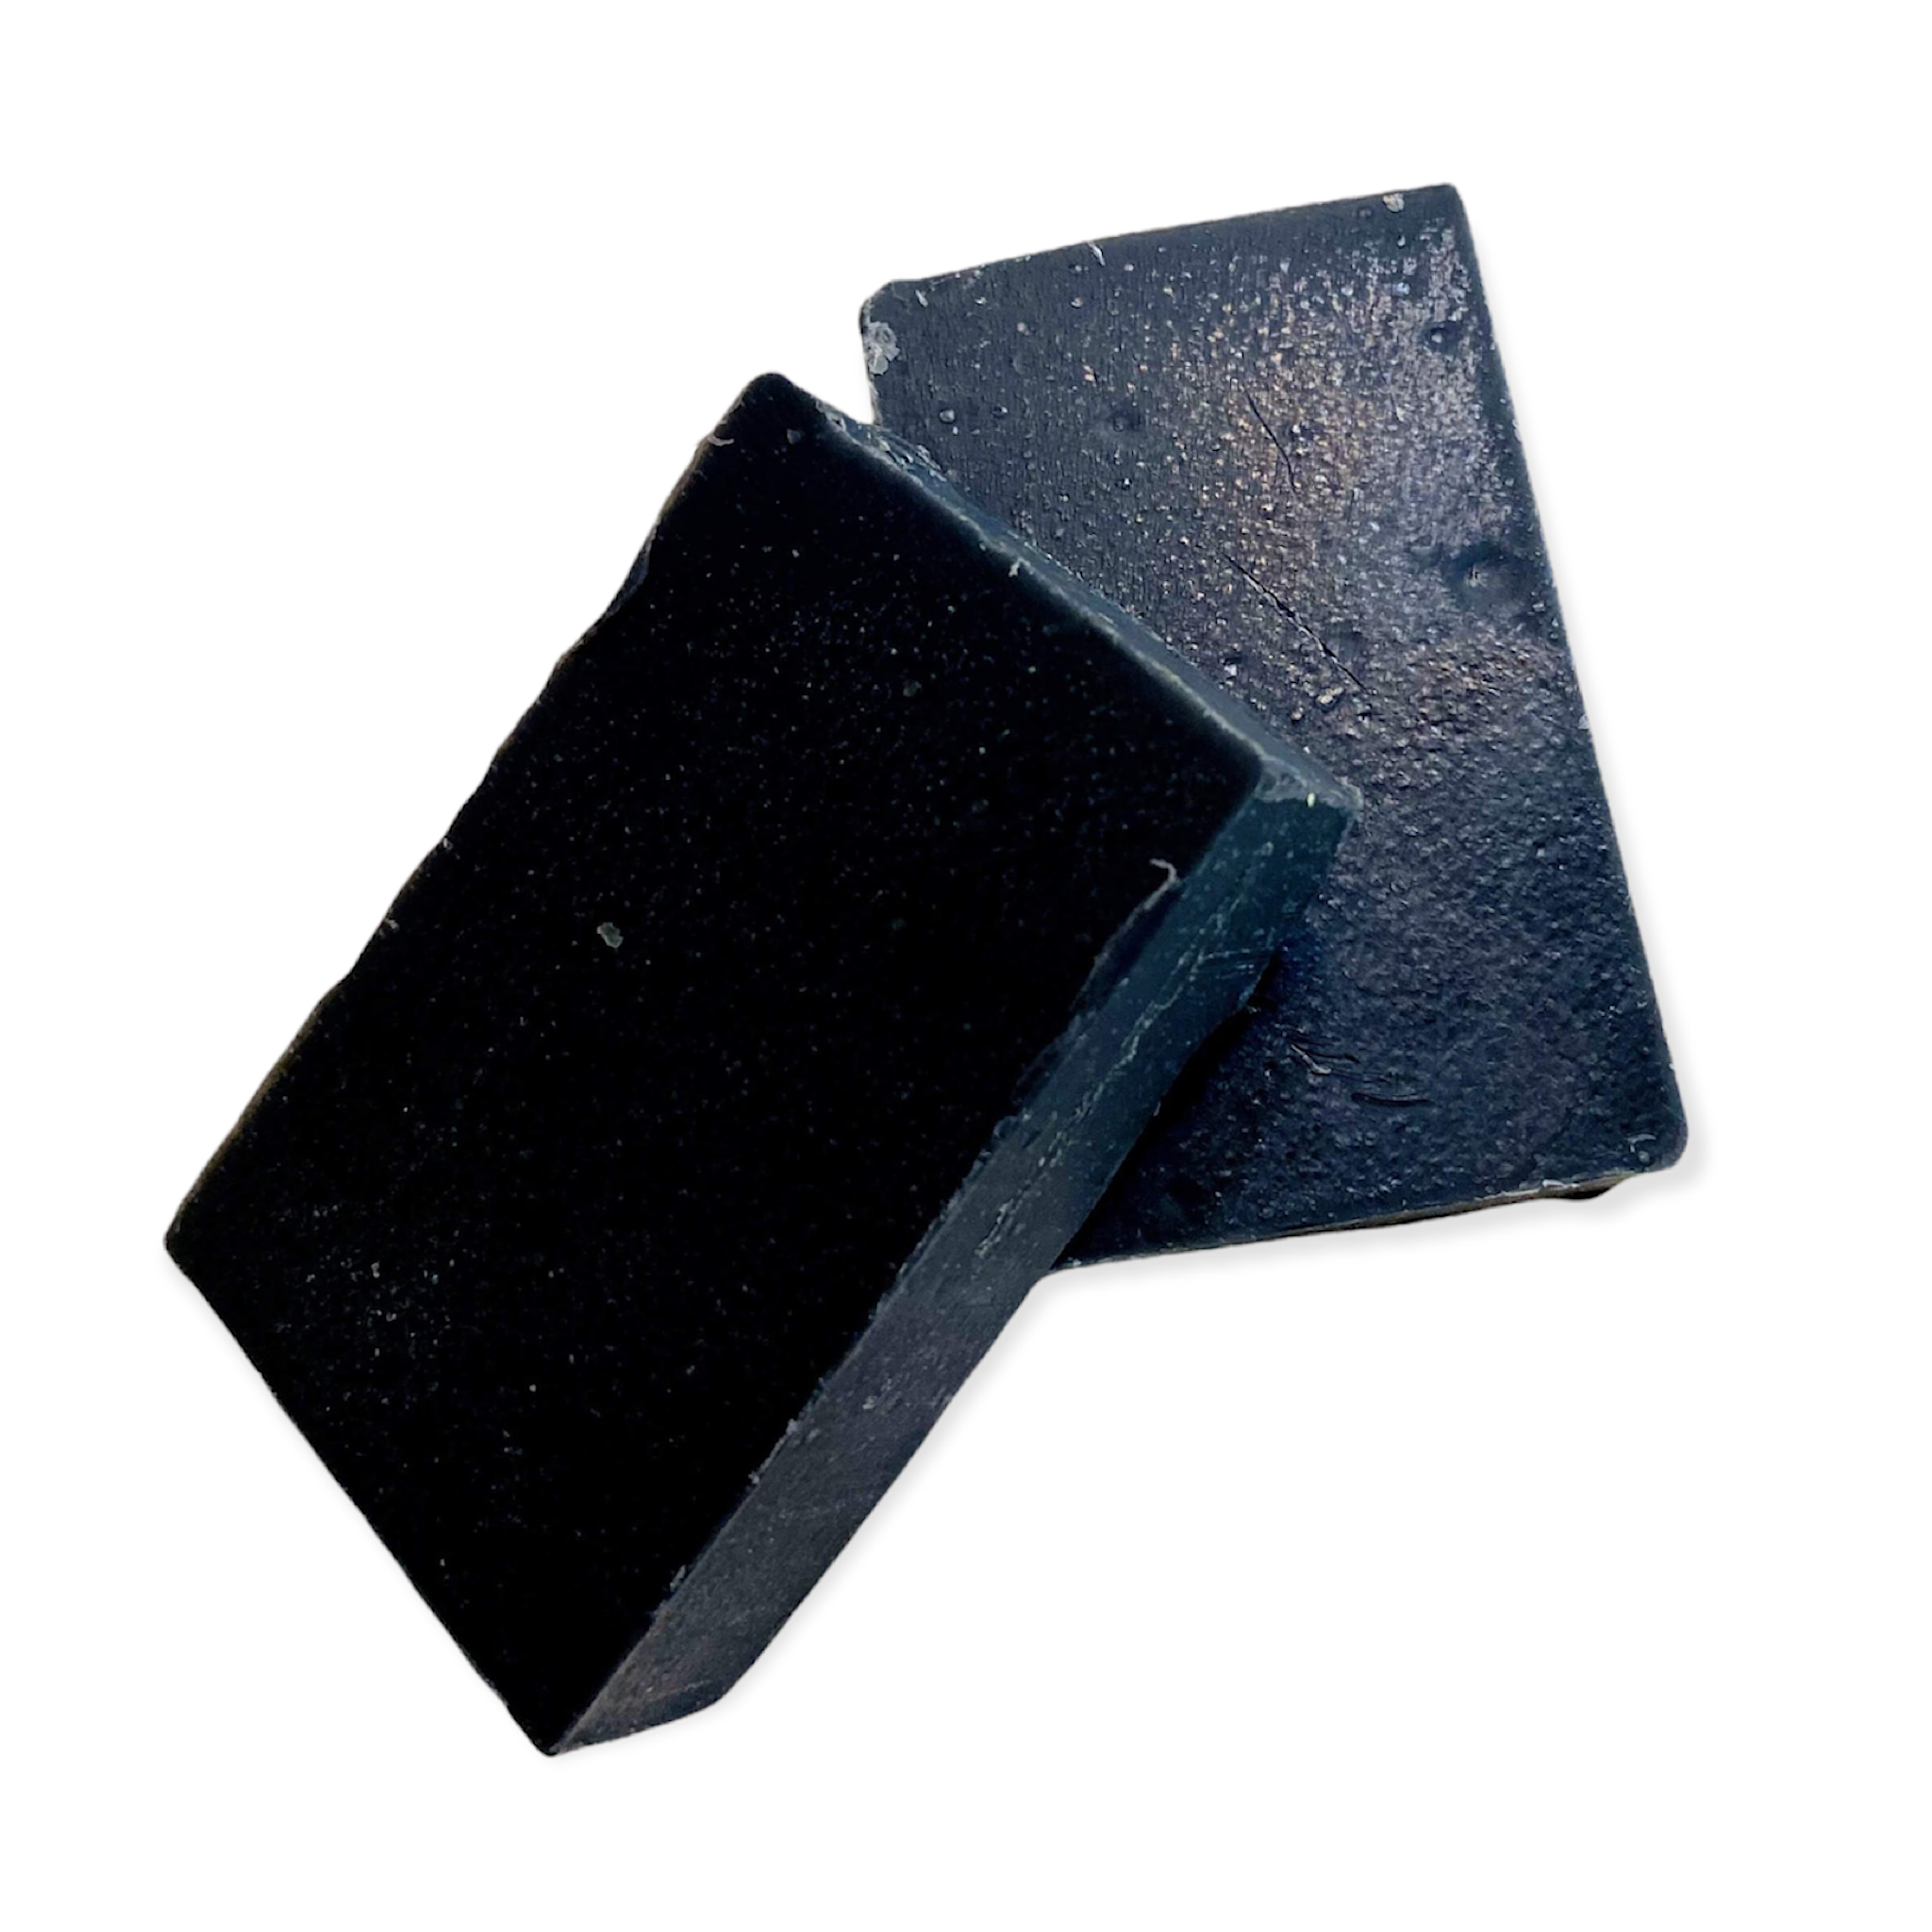 goldnskin activated charcoal herbal soap